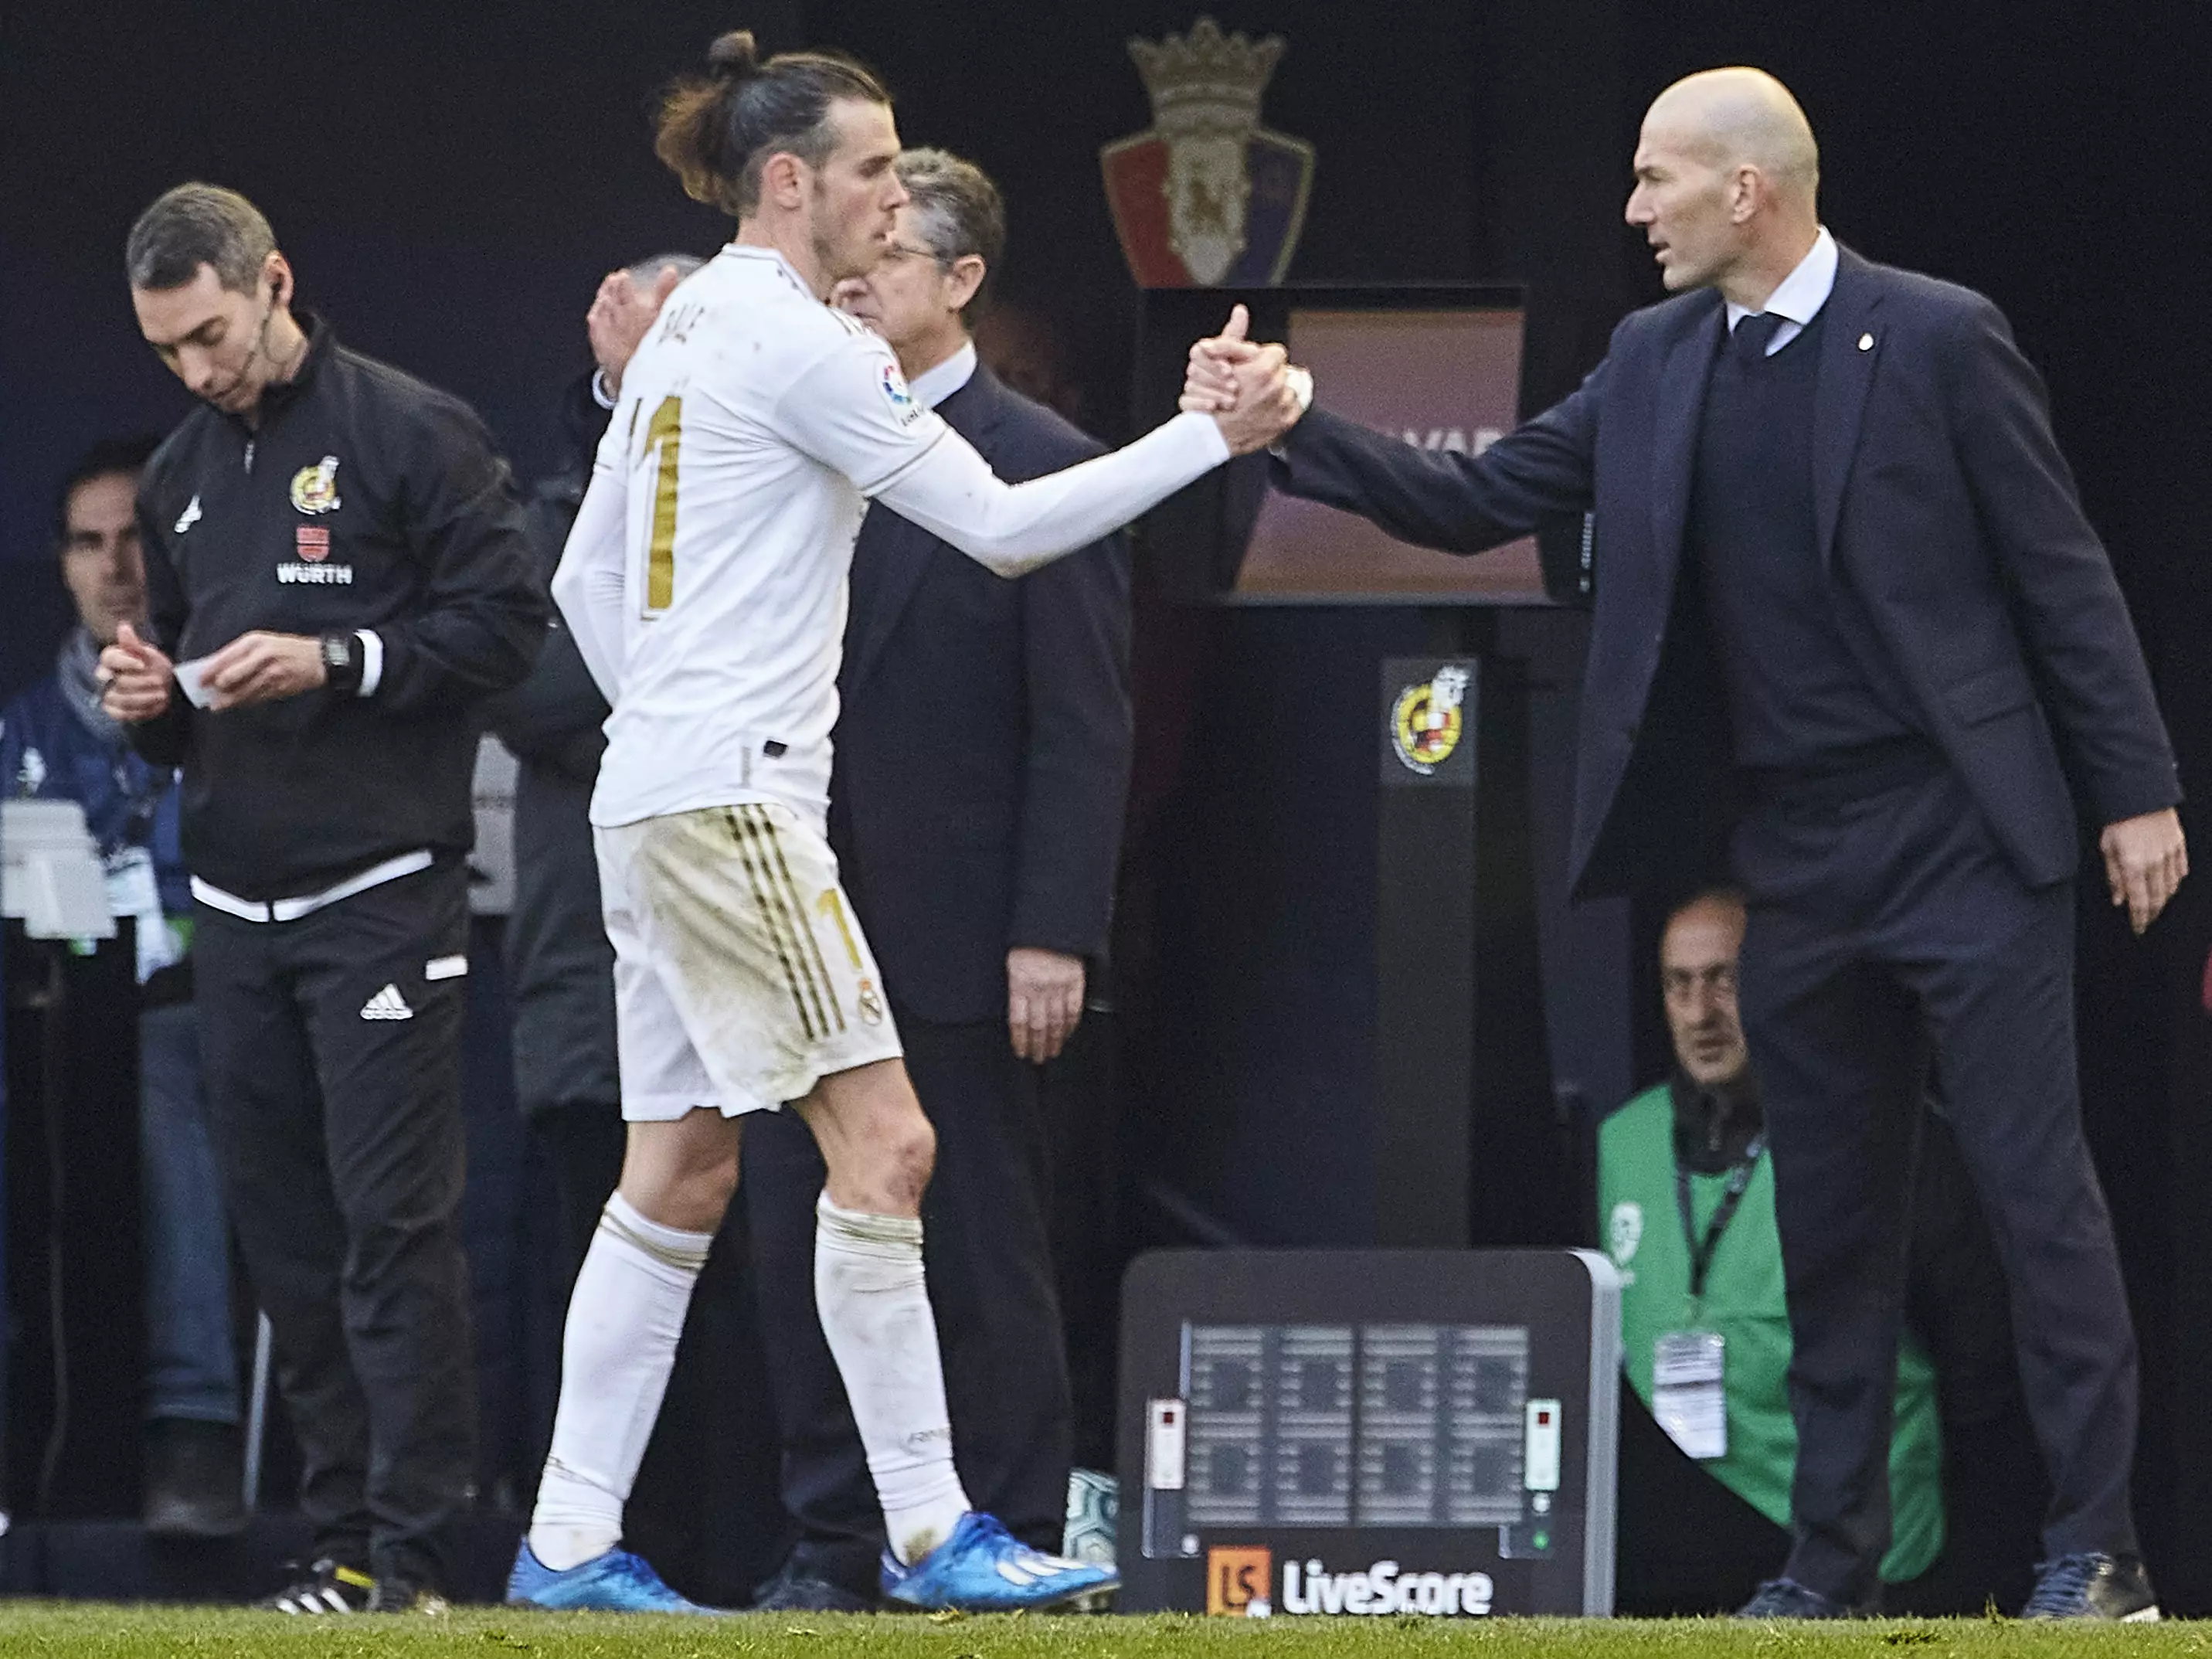 Bale has never been a favourite of Zidane's, despite winning him a Champions League final. Image: PA Images